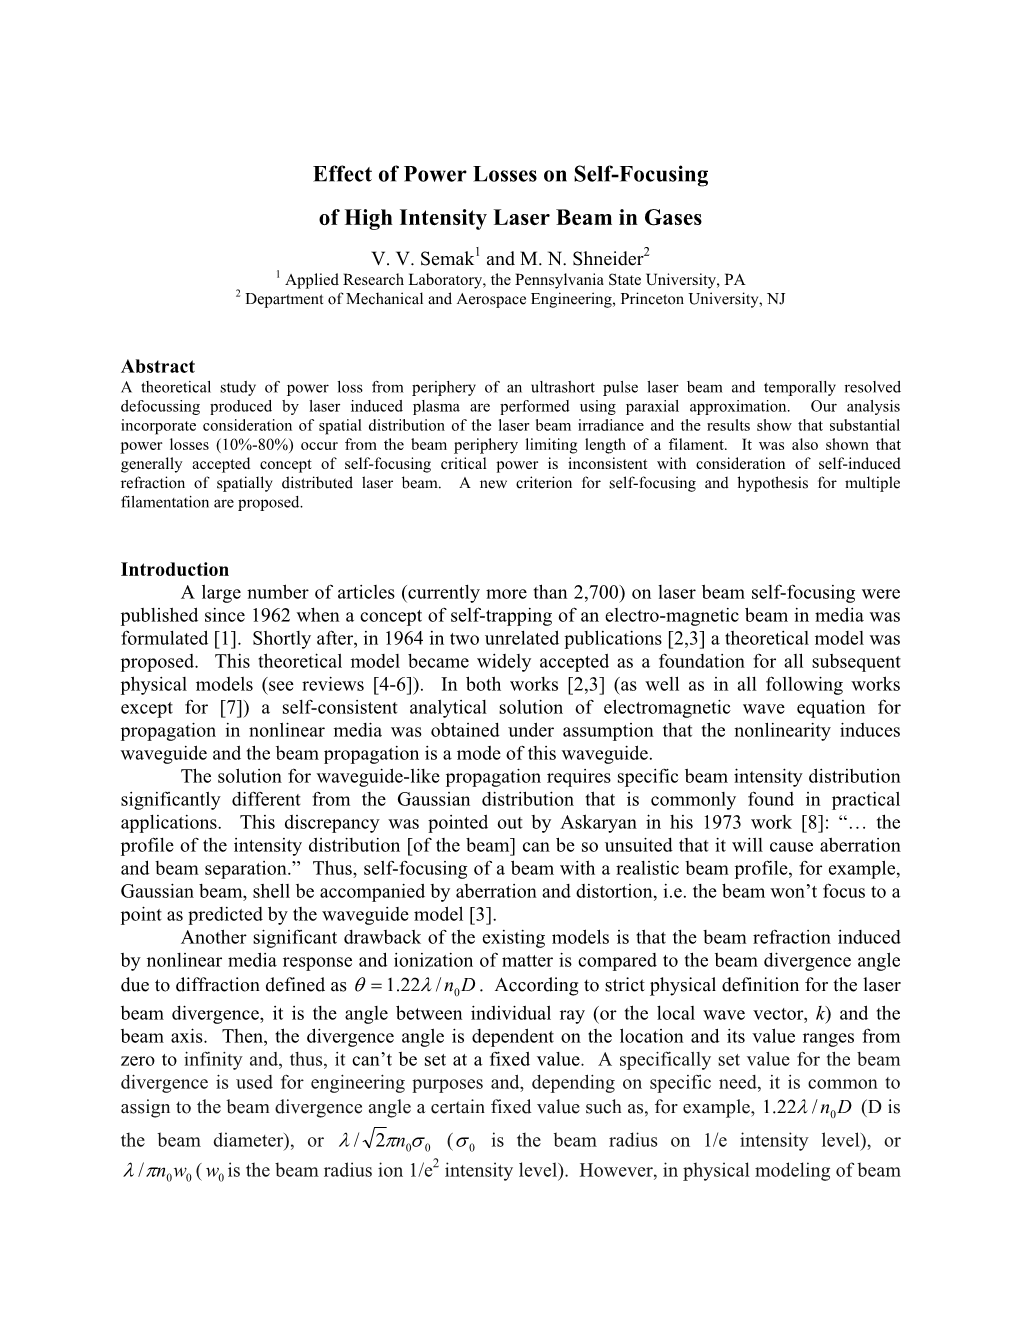 Effect of Power Losses on Self-Focusing of High Intensity Laser Beam in Gases V